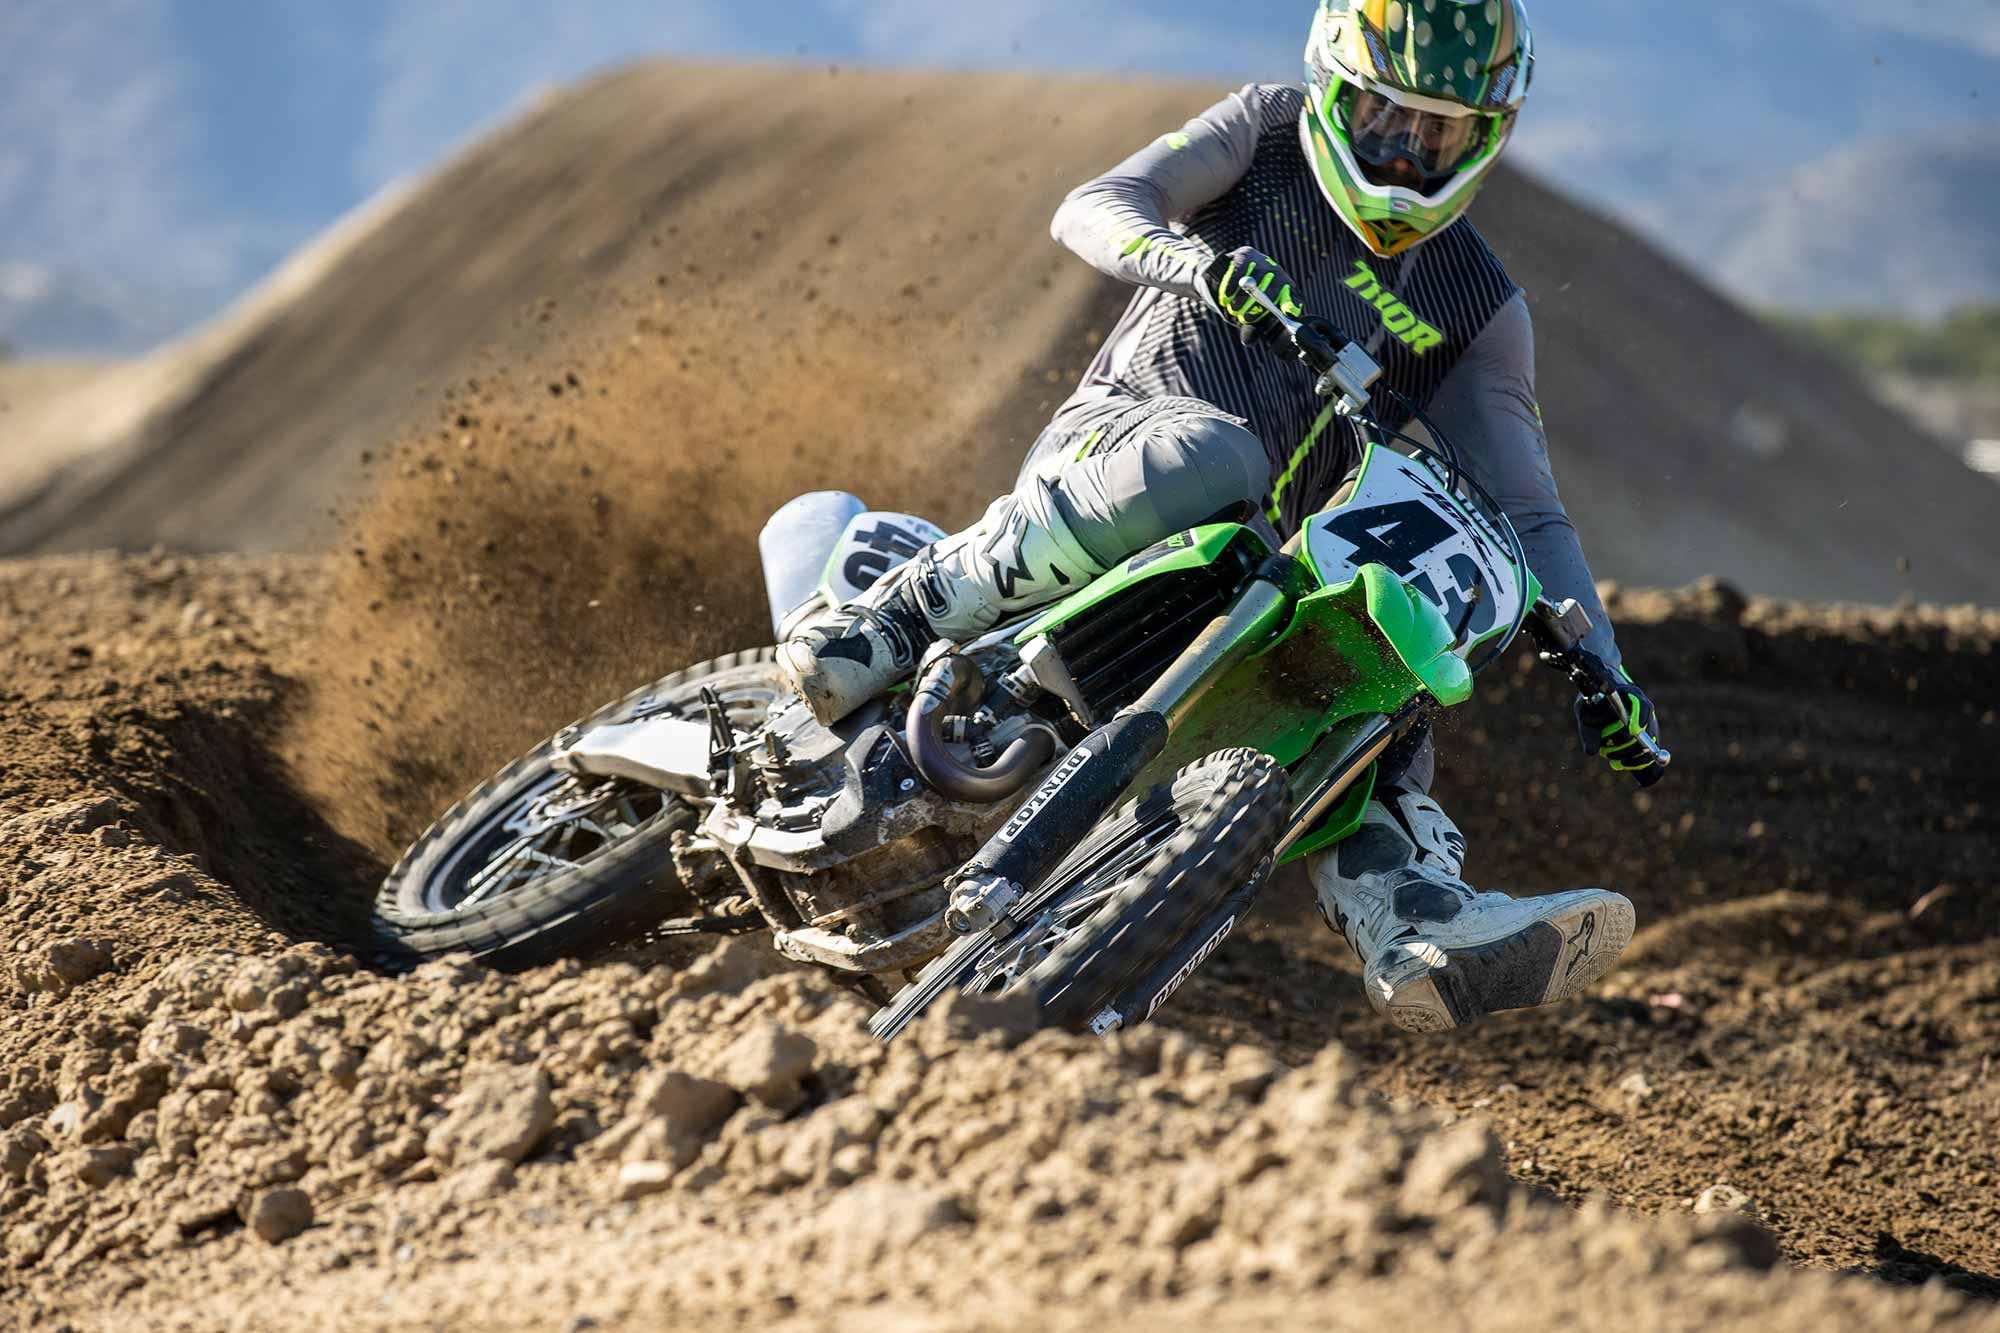 “The Kawasaki has very perky engine characteristics and strong bottom-end power, second only to the Yamaha. Team Green needs to update EFI mapping options to include a button for changing on the fly as swapping couplers manually is outdated.” <i>—Cody Johnston</i>